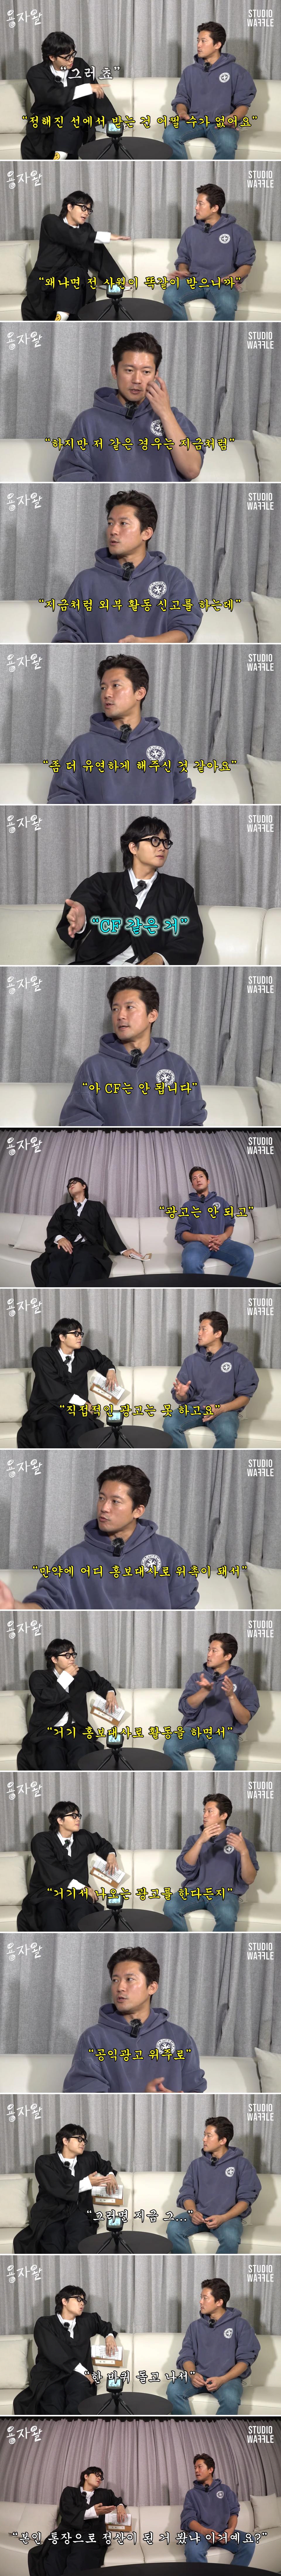 Announcer Kim Dae-ho said MBC released a lot of outdoor activities, so he paid off almost all of his house loans